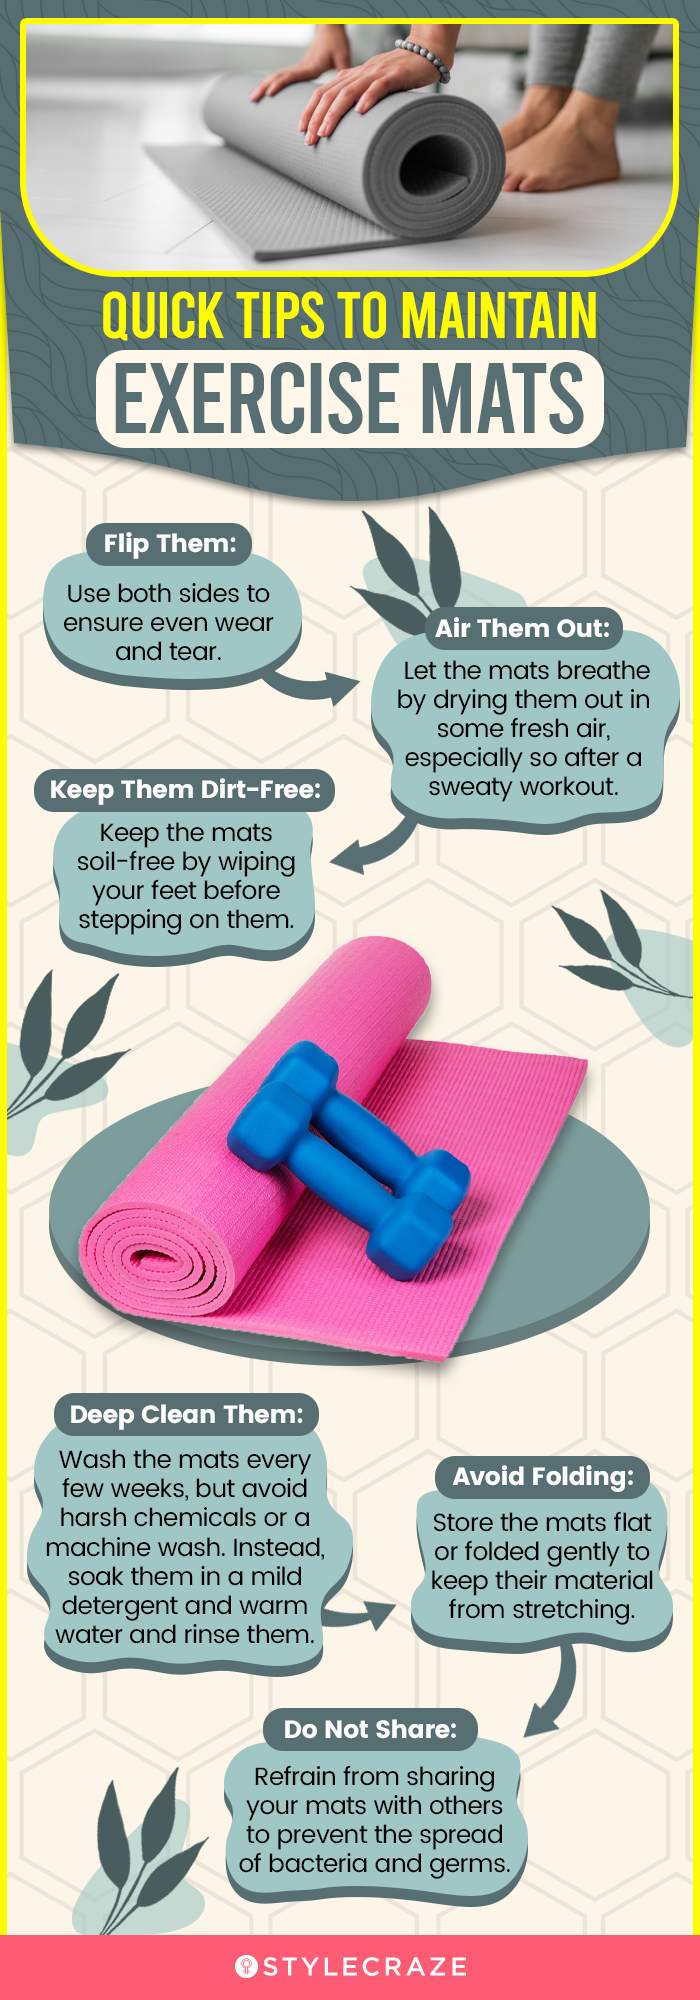 Tips To Maintain Exercise Mats (infographic)